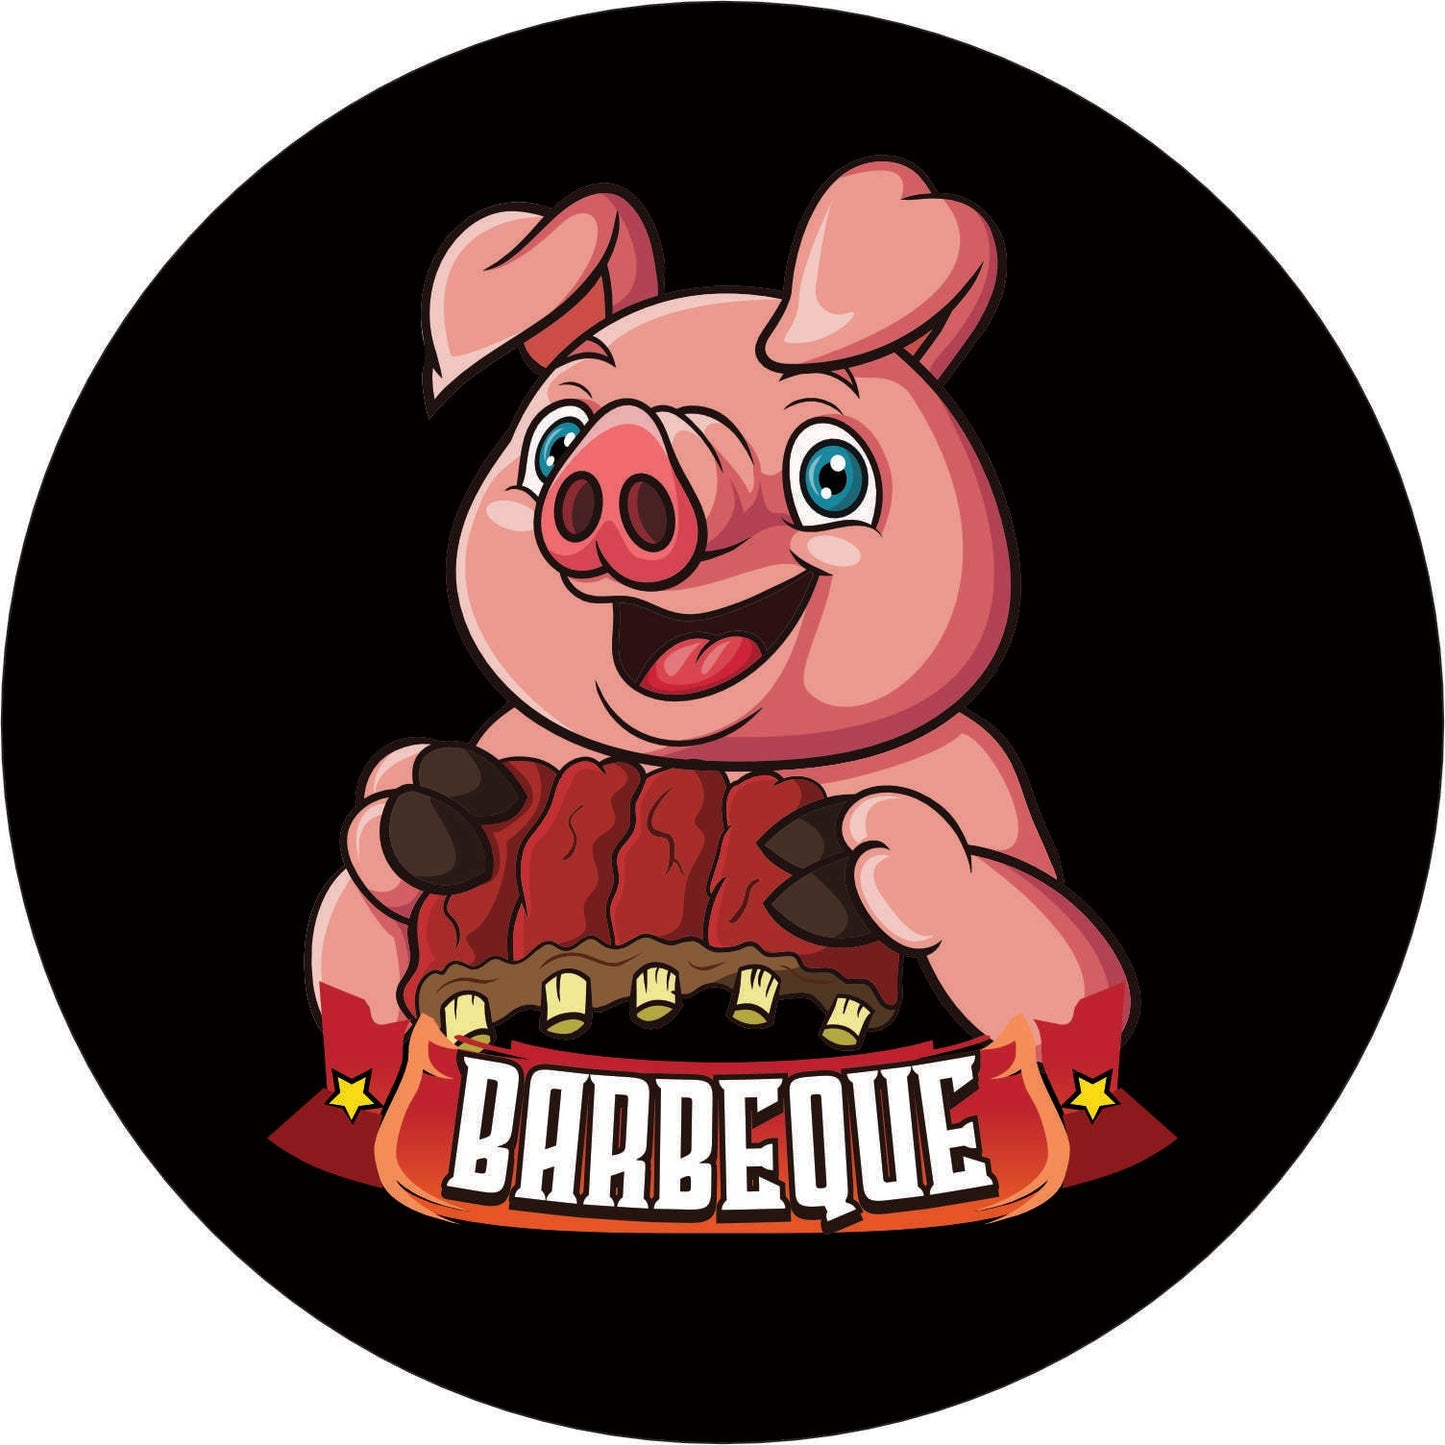 054-Single-sided illuminated sign - BBQ Barbeque